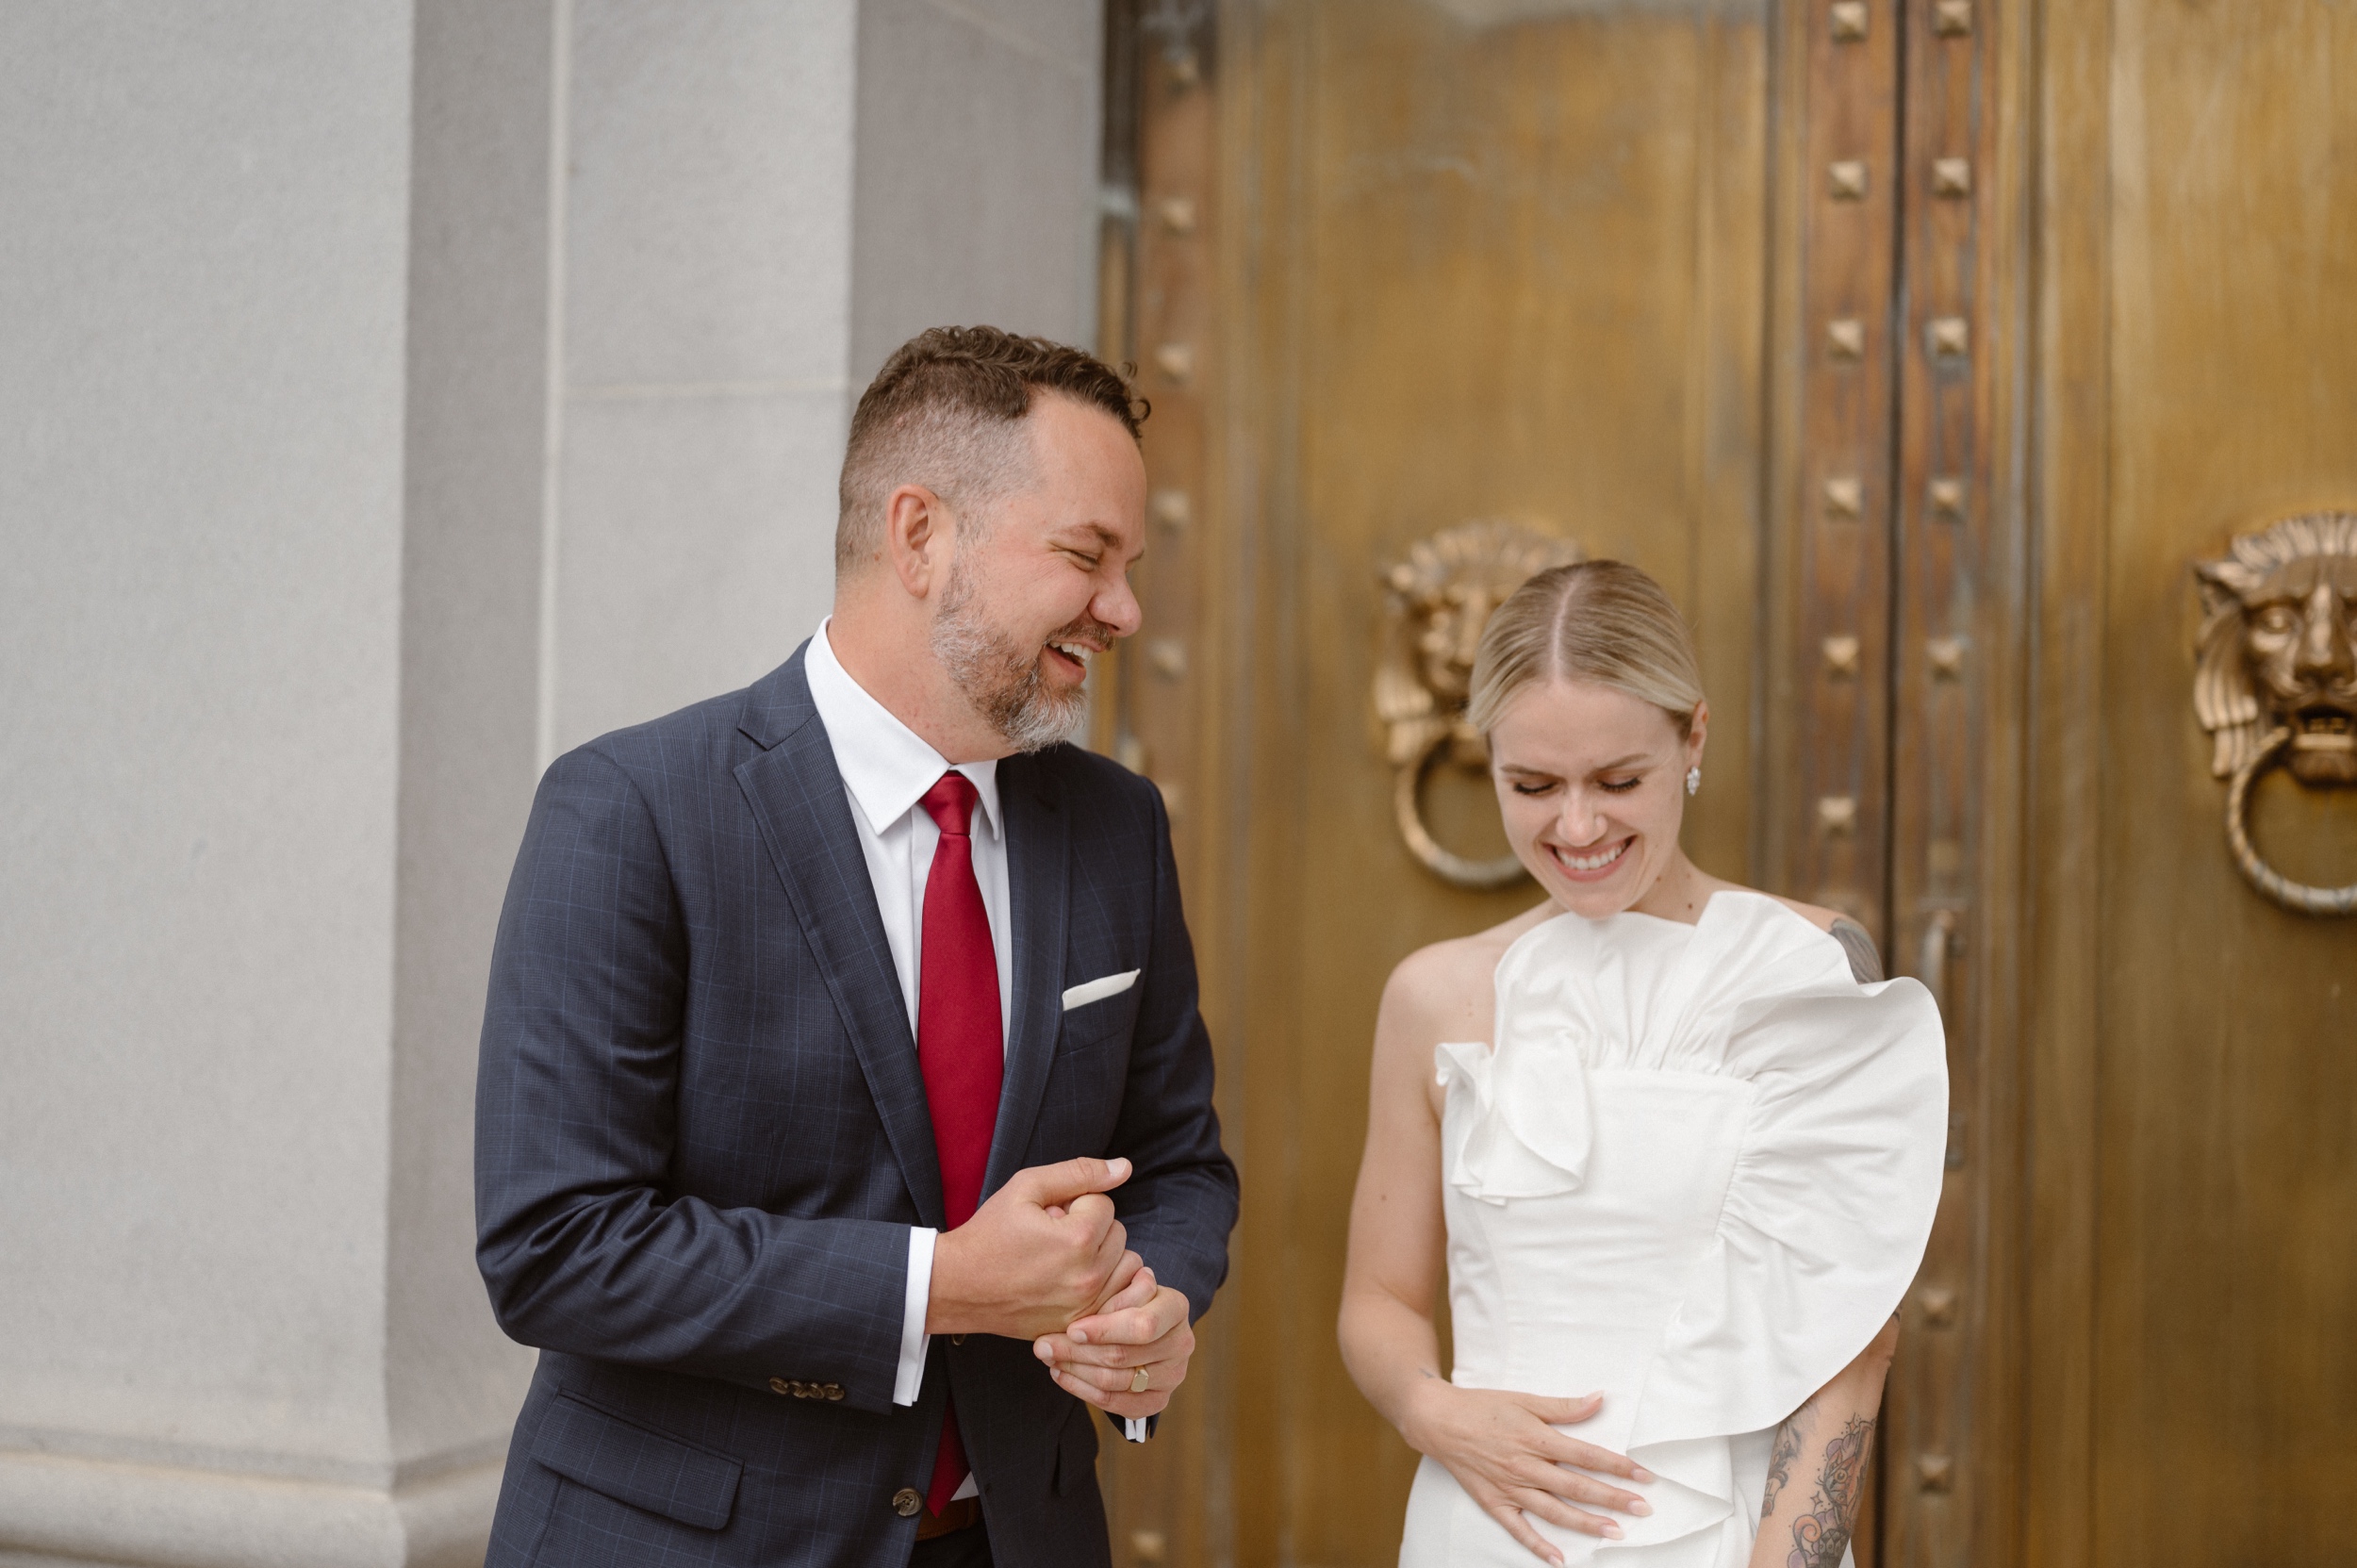 A candid wedding photo of a bride and groom laughing together. Photo by Colorado wedding photographer Ashley Joyce.